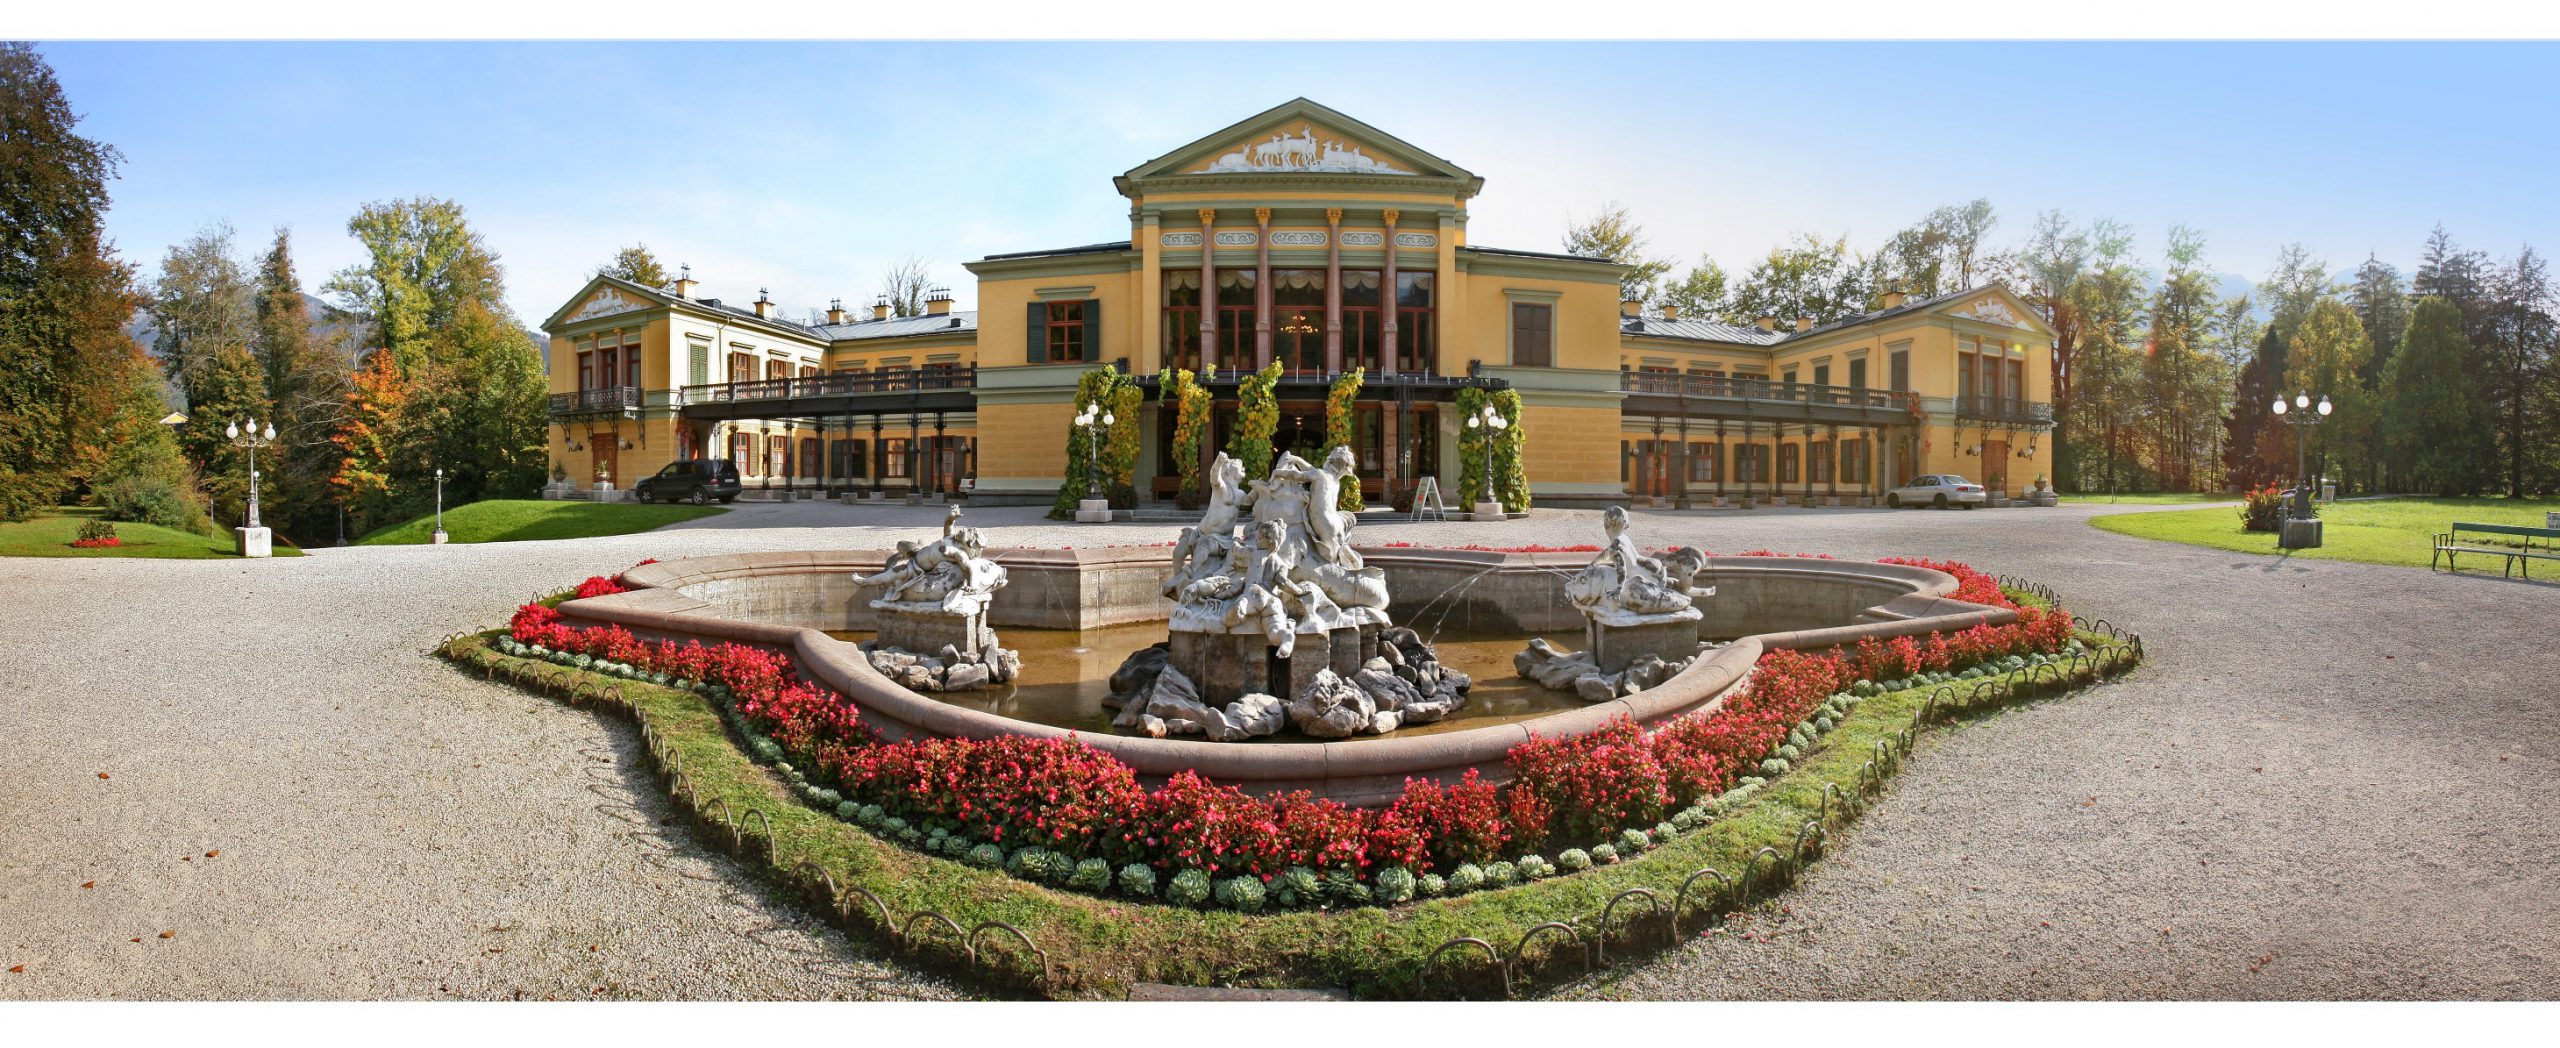 Cyclists will be thrilled - the Kaiservilla invites you to be amazed